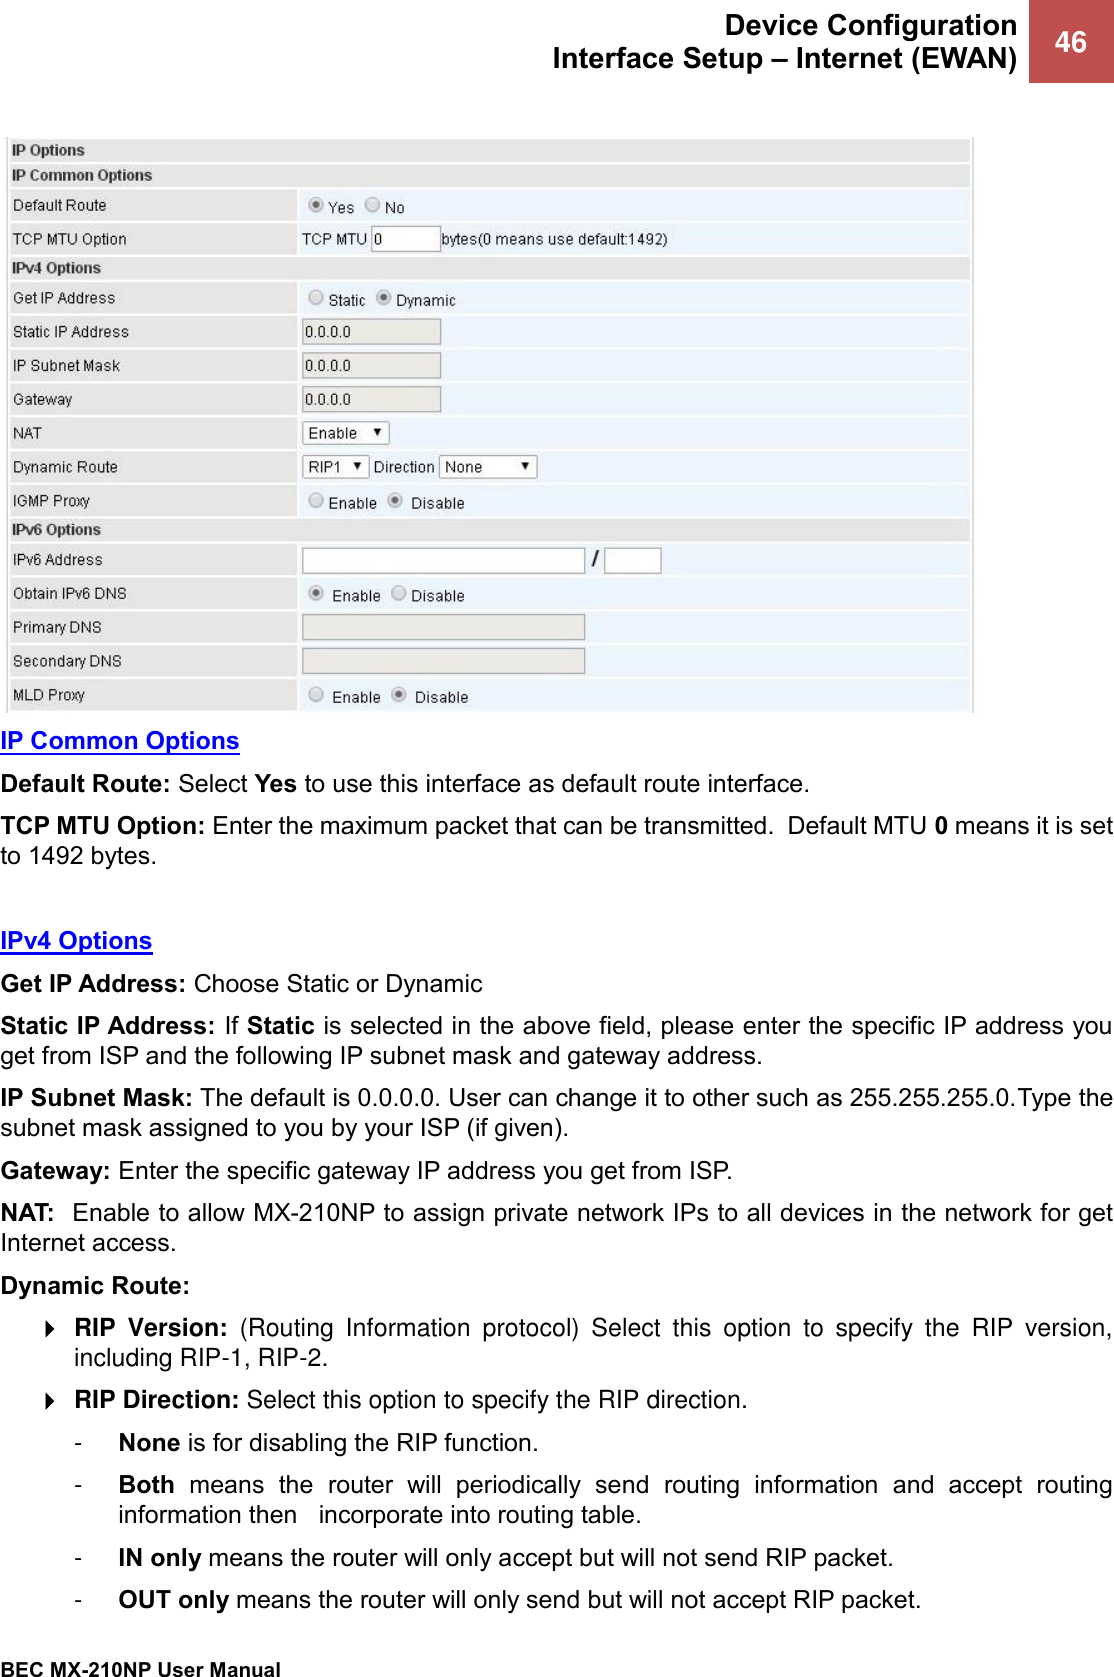 Device Configuration Interface Setup – Internet (EWAN) 46   BEC MX-210NP User Manual   IP Common Options Default Route: Select Yes to use this interface as default route interface. TCP MTU Option: Enter the maximum packet that can be transmitted.  Default MTU 0 means it is set to 1492 bytes.    IPv4 Options Get IP Address: Choose Static or Dynamic Static IP Address: If Static is selected in the above field, please enter the specific IP address you get from ISP and the following IP subnet mask and gateway address. IP Subnet Mask: The default is 0.0.0.0. User can change it to other such as 255.255.255.0.Type the subnet mask assigned to you by your ISP (if given). Gateway: Enter the specific gateway IP address you get from ISP. NAT:  Enable to allow MX-210NP to assign private network IPs to all devices in the network for get Internet access. Dynamic Route:   RIP  Version:  (Routing  Information  protocol)  Select  this  option  to  specify  the  RIP  version, including RIP-1, RIP-2.   RIP Direction: Select this option to specify the RIP direction.  -  None is for disabling the RIP function.  -  Both  means  the  router  will  periodically  send  routing  information  and  accept  routing information then   incorporate into routing table.  -  IN only means the router will only accept but will not send RIP packet.  -  OUT only means the router will only send but will not accept RIP packet. 